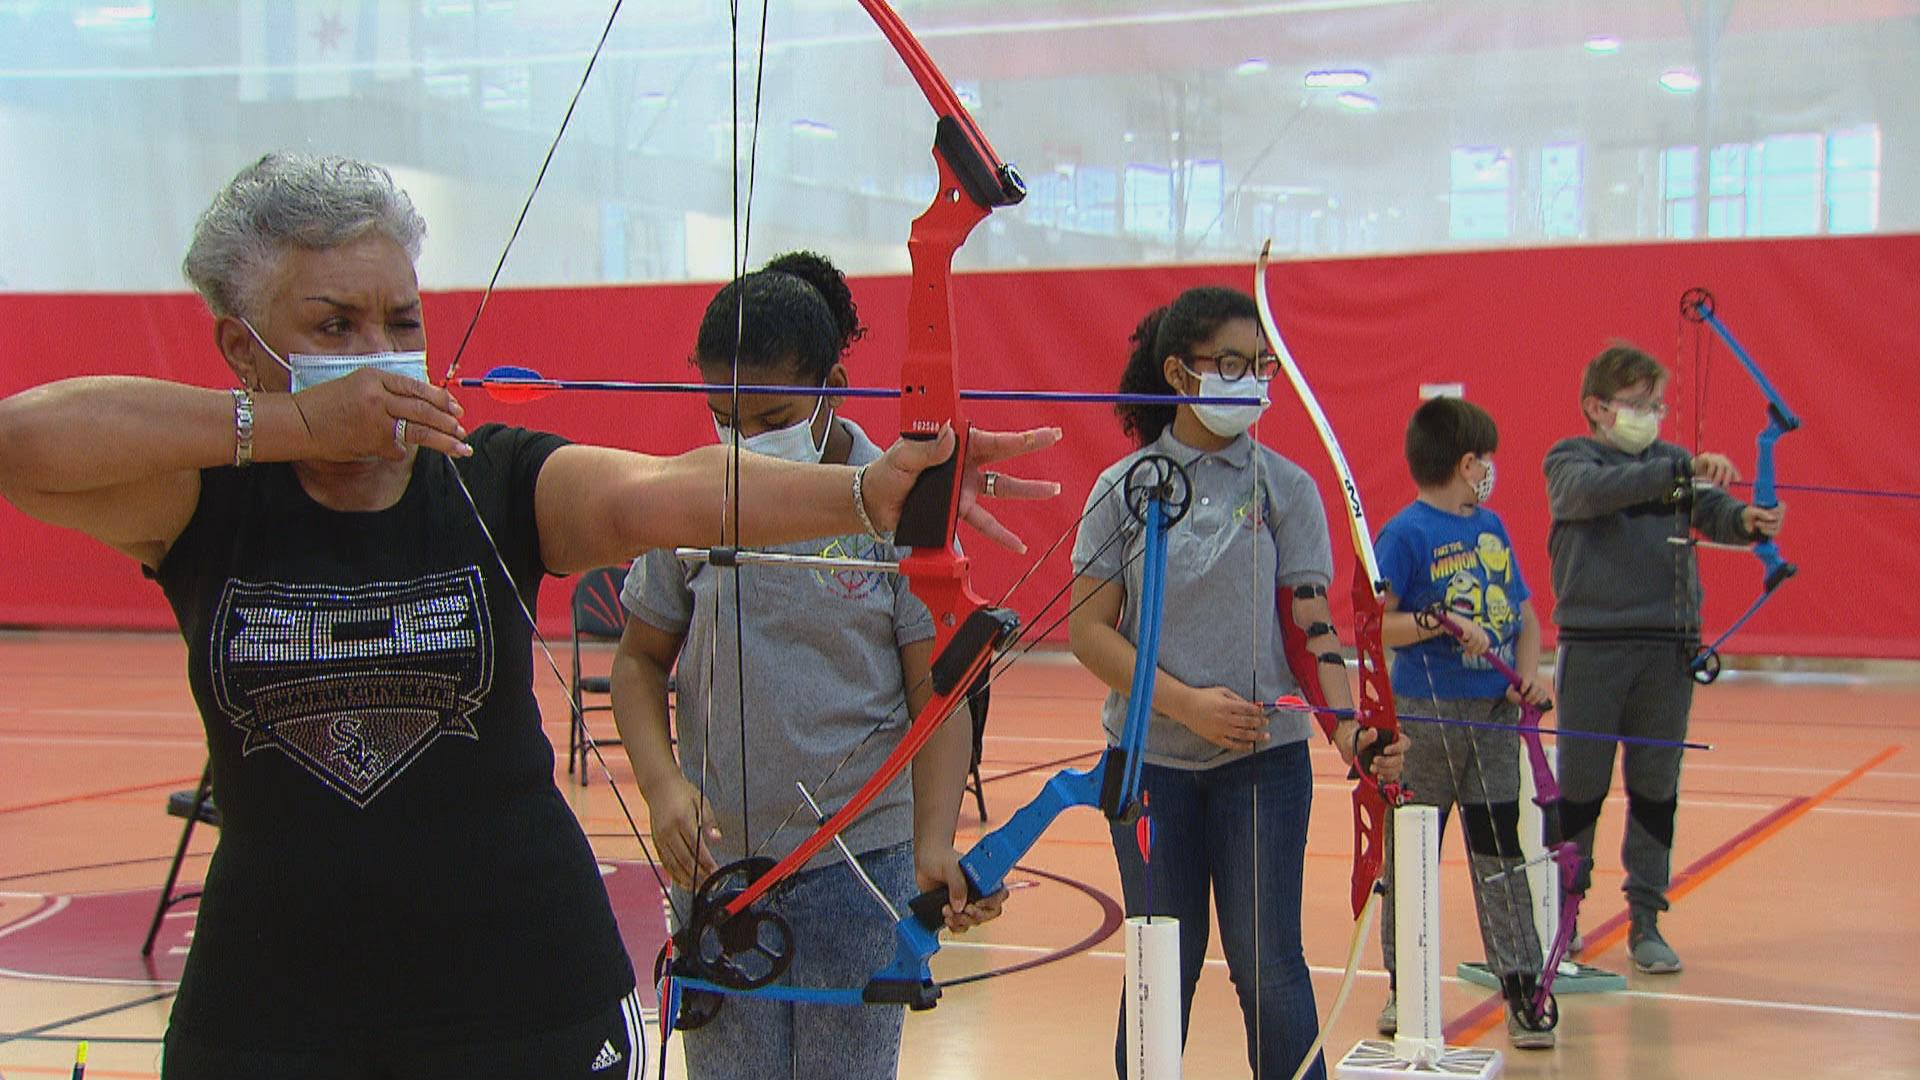 Archers practice their shooting during a lesson held by the Chicago Archery Club at the Kroc Center Chicago on Nov. 19, 2020. (WTTW News)